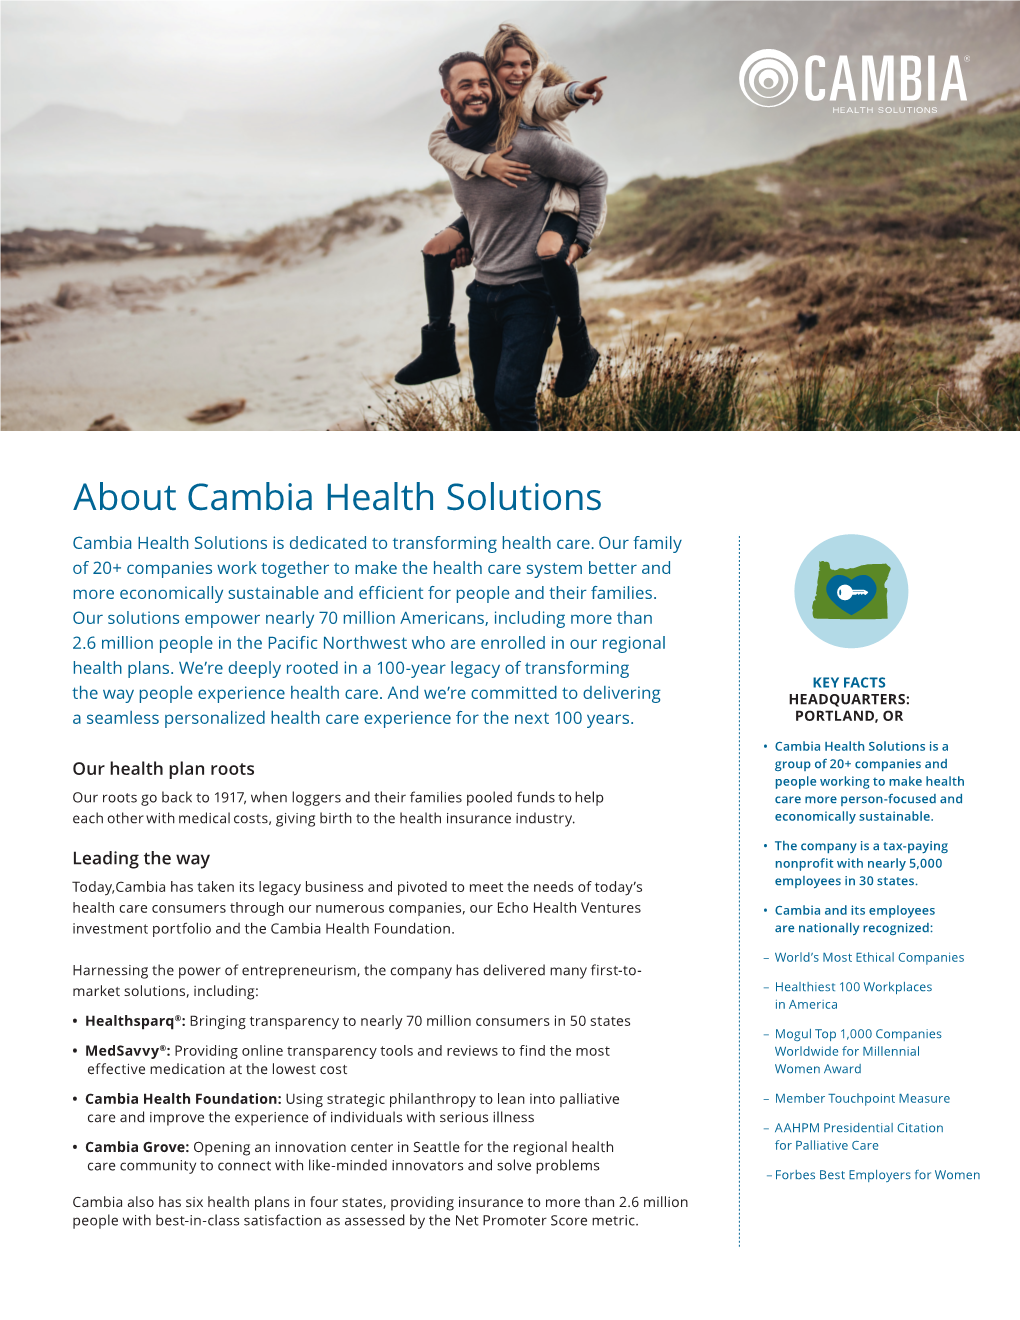 Cambia Health Solutions Corporate Facts